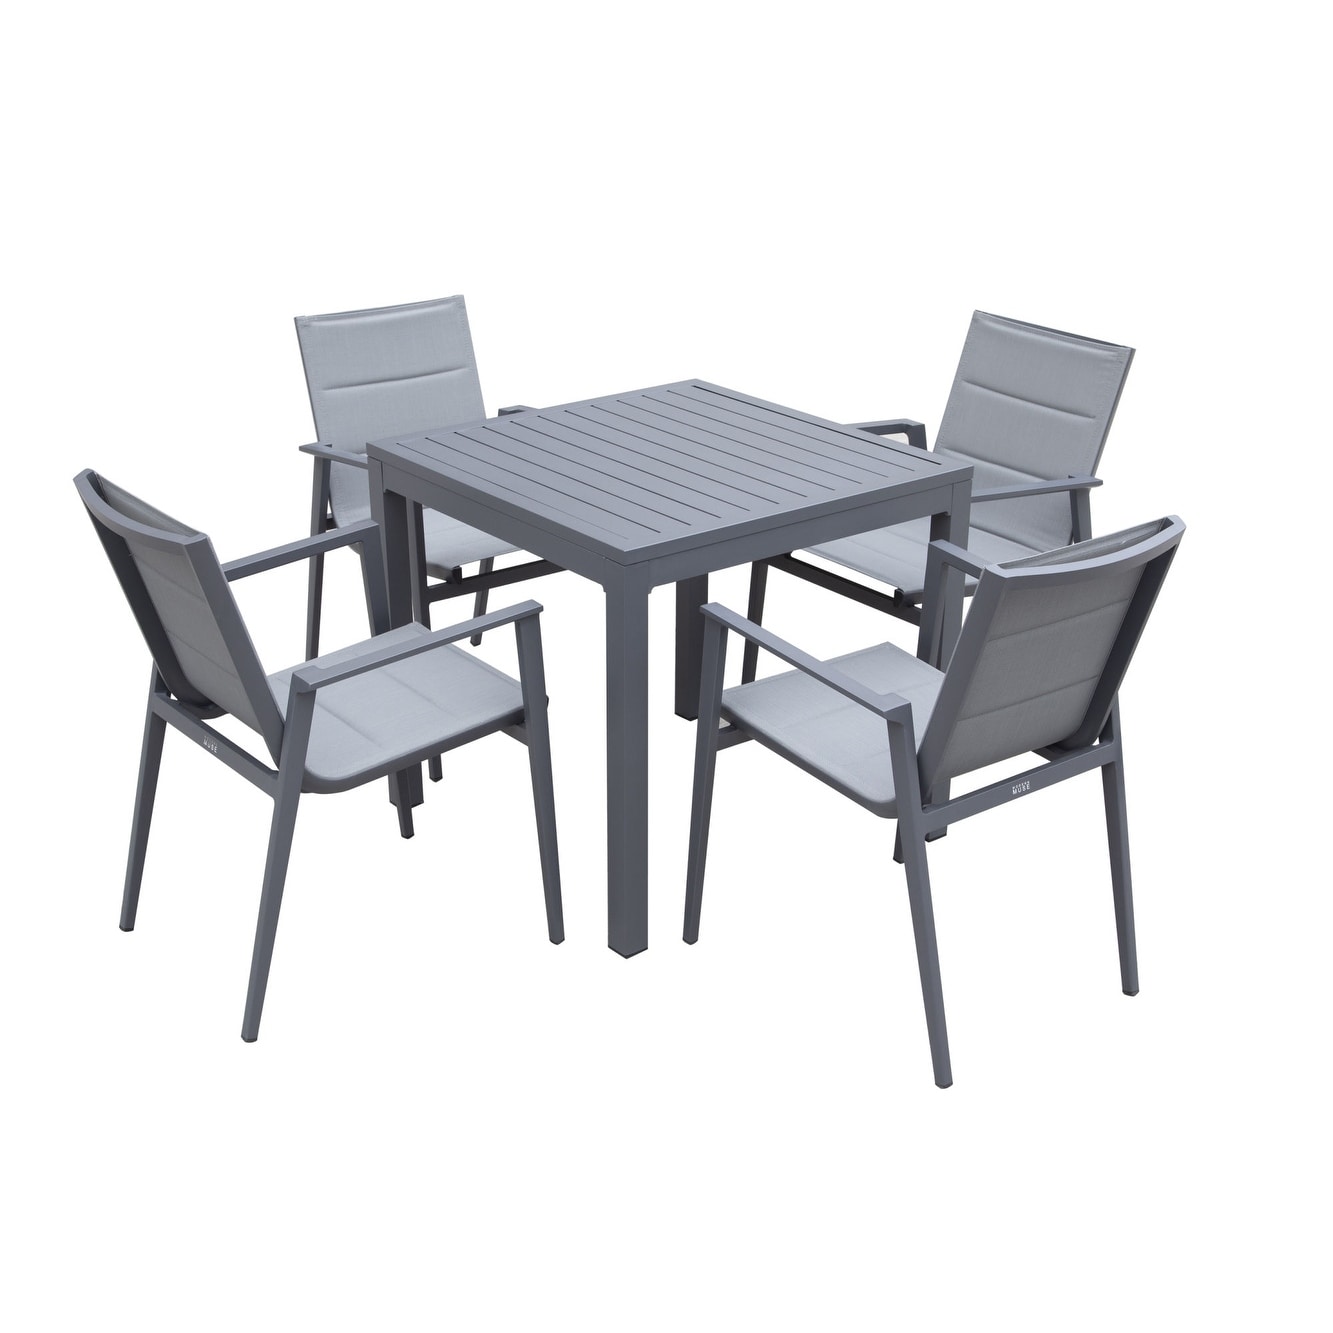 Modern Muse Aluminum Patio Dining Table And Chair 5 Pcs Set